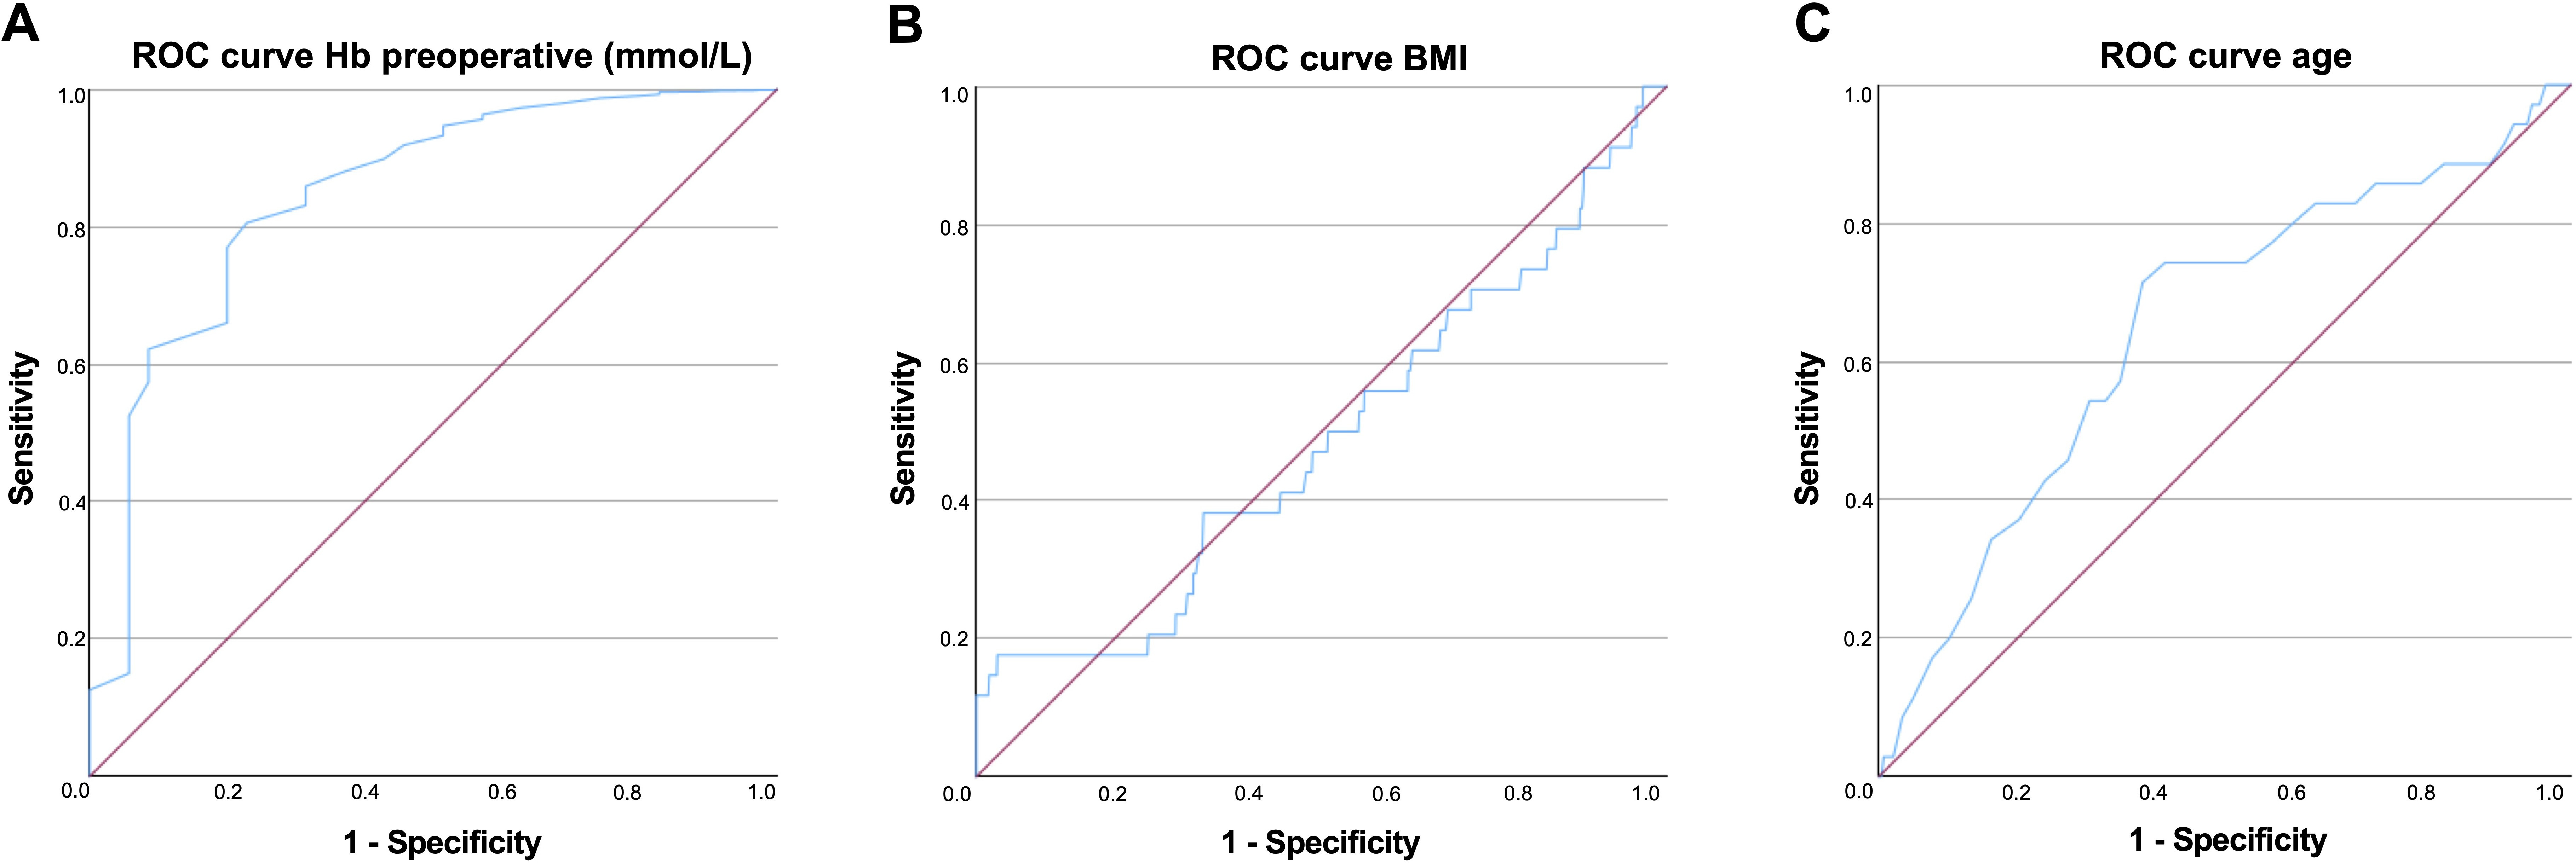 Fig. 1 
          For all charts, A) receiver operating characteristic (ROC) curve for haemoglobin (mmol/l), B) ROC curve for BMI, and C) ROC curve for age. a) To identify independent predictors for blood transfusion in total hip arthroplasty (THA) patients, the optimal threshold for interval scaled variables were calculated based on ROC curves. b) To identify independent predictors for blood transfusion in THA patients the optimal threshold for interval scaled variables were calculated based on ROC curves. c) To identify independent predictors for blood transfusion in THA patients the optimal threshold for interval scaled variables were calculated based on ROC curves.
        